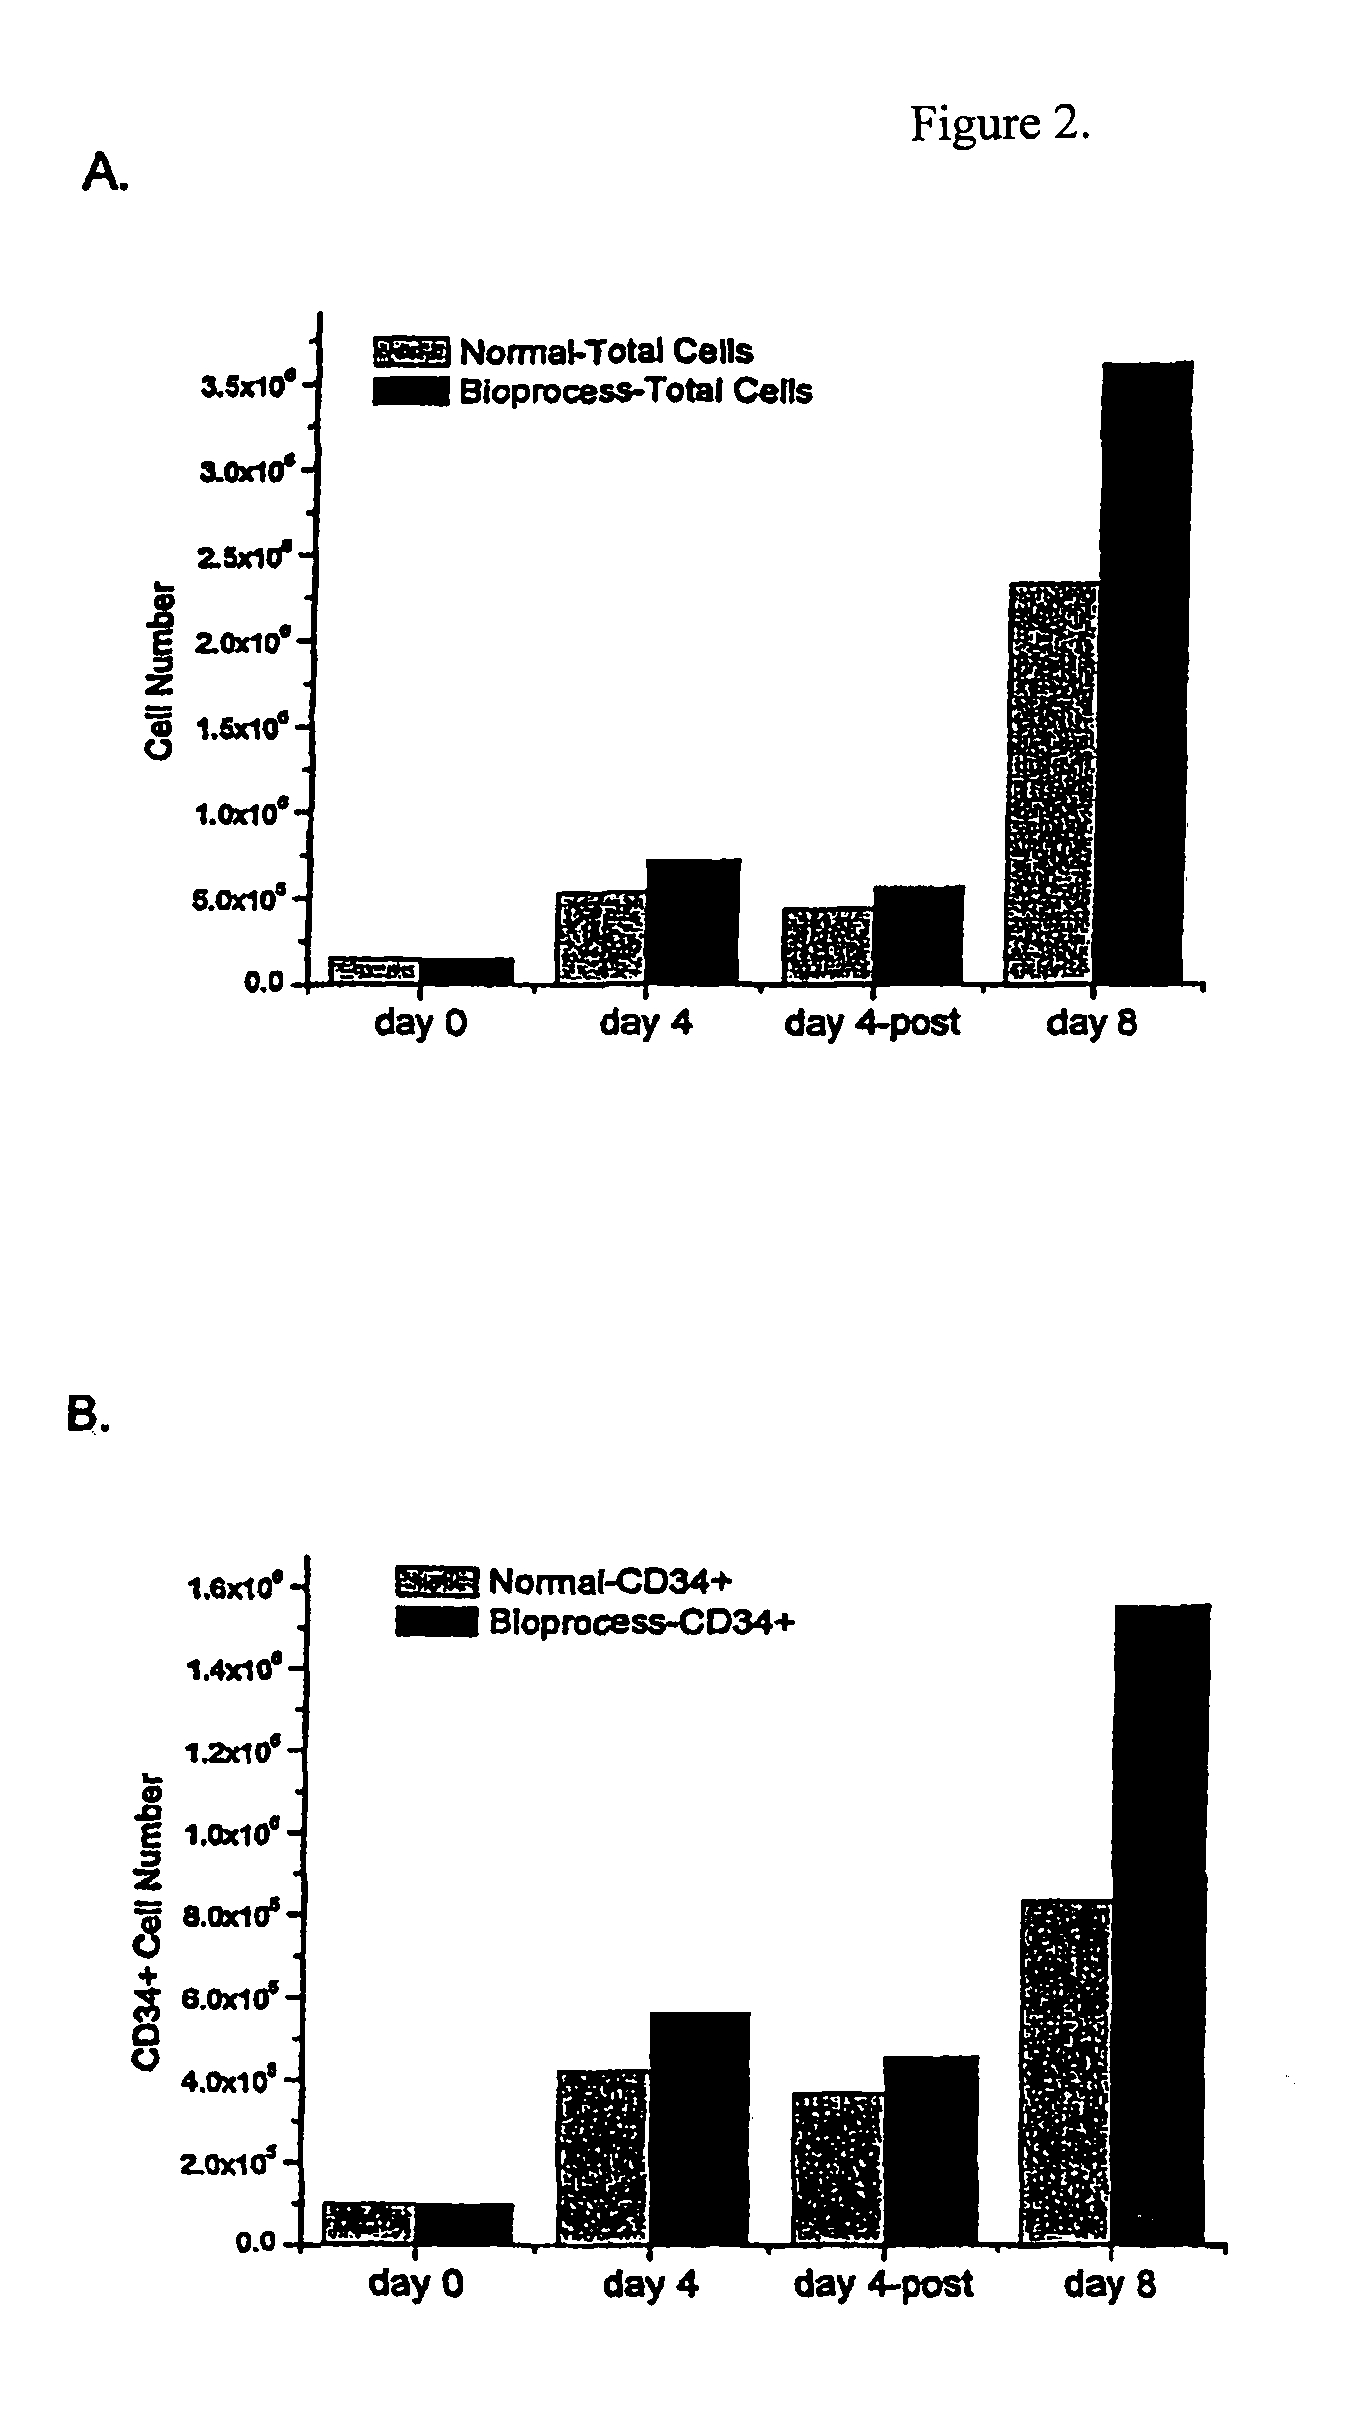 Apparatus and methods for amplification of blood stem cell numbers